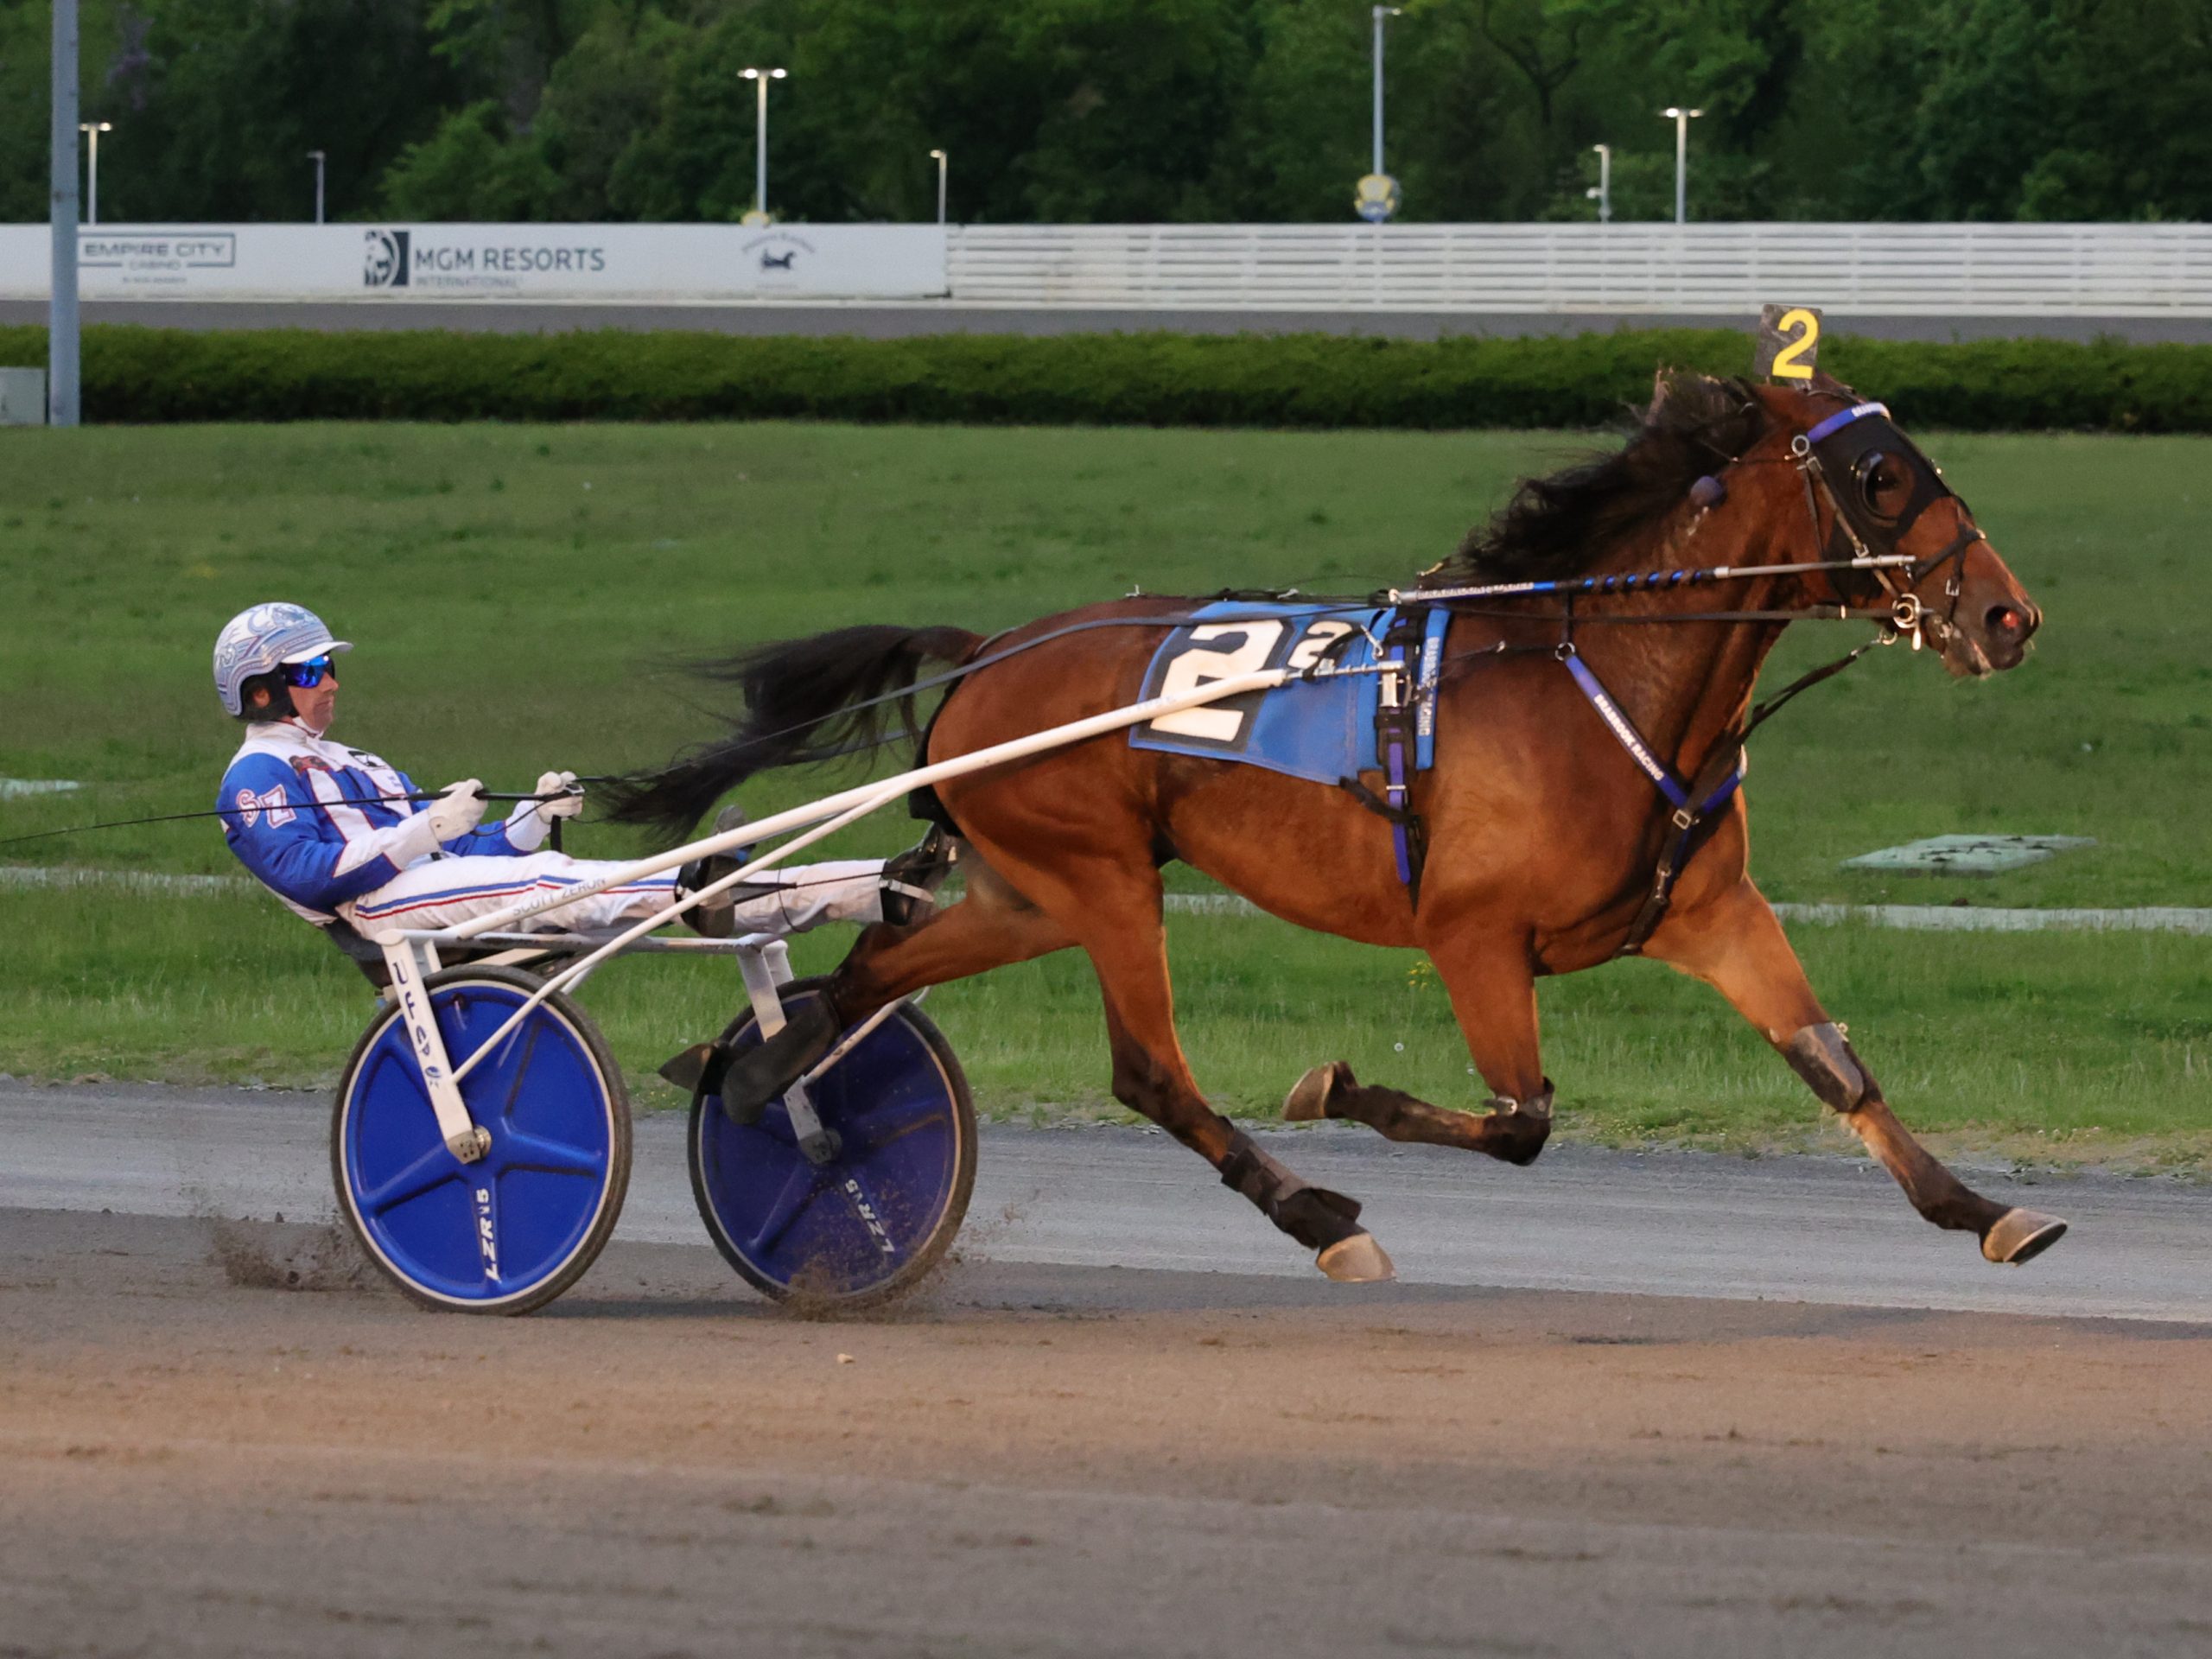 Co-feature Invitational trots held at Yonkers